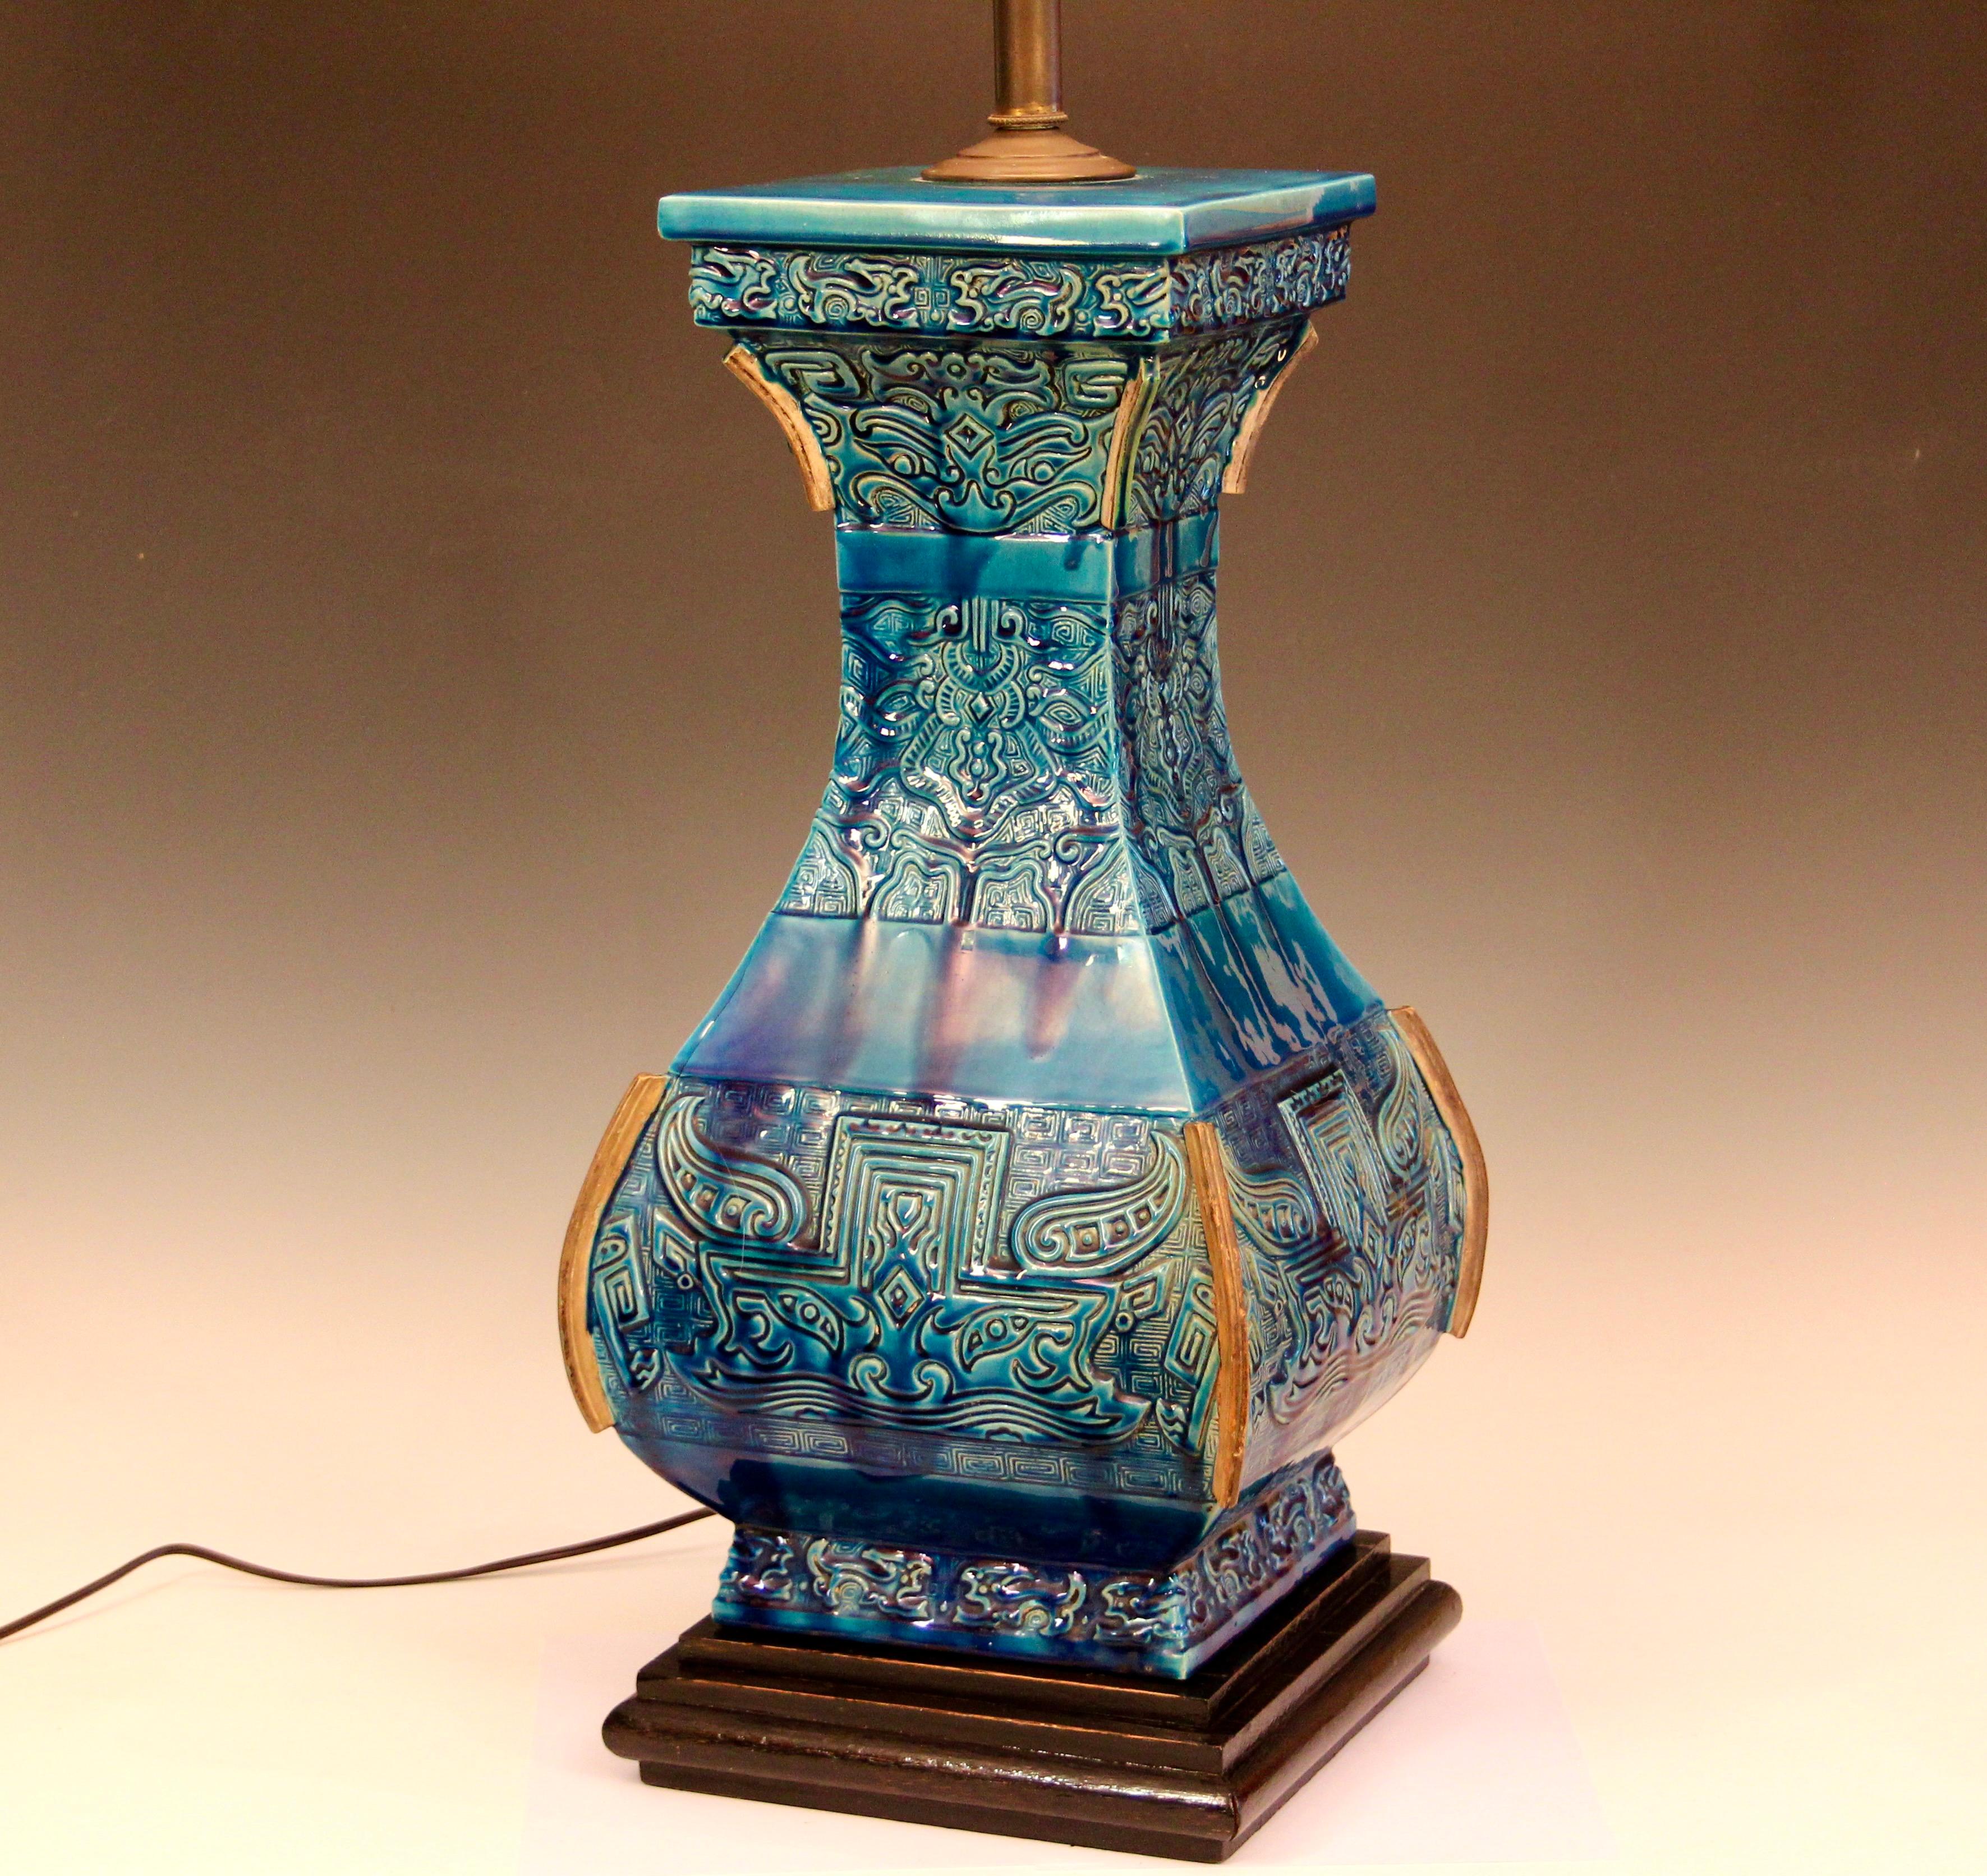 Hand-Crafted Huge Zaccagnini Pottery Mid Century Italian Ming Lamp Vintage 1950's Turquoise For Sale